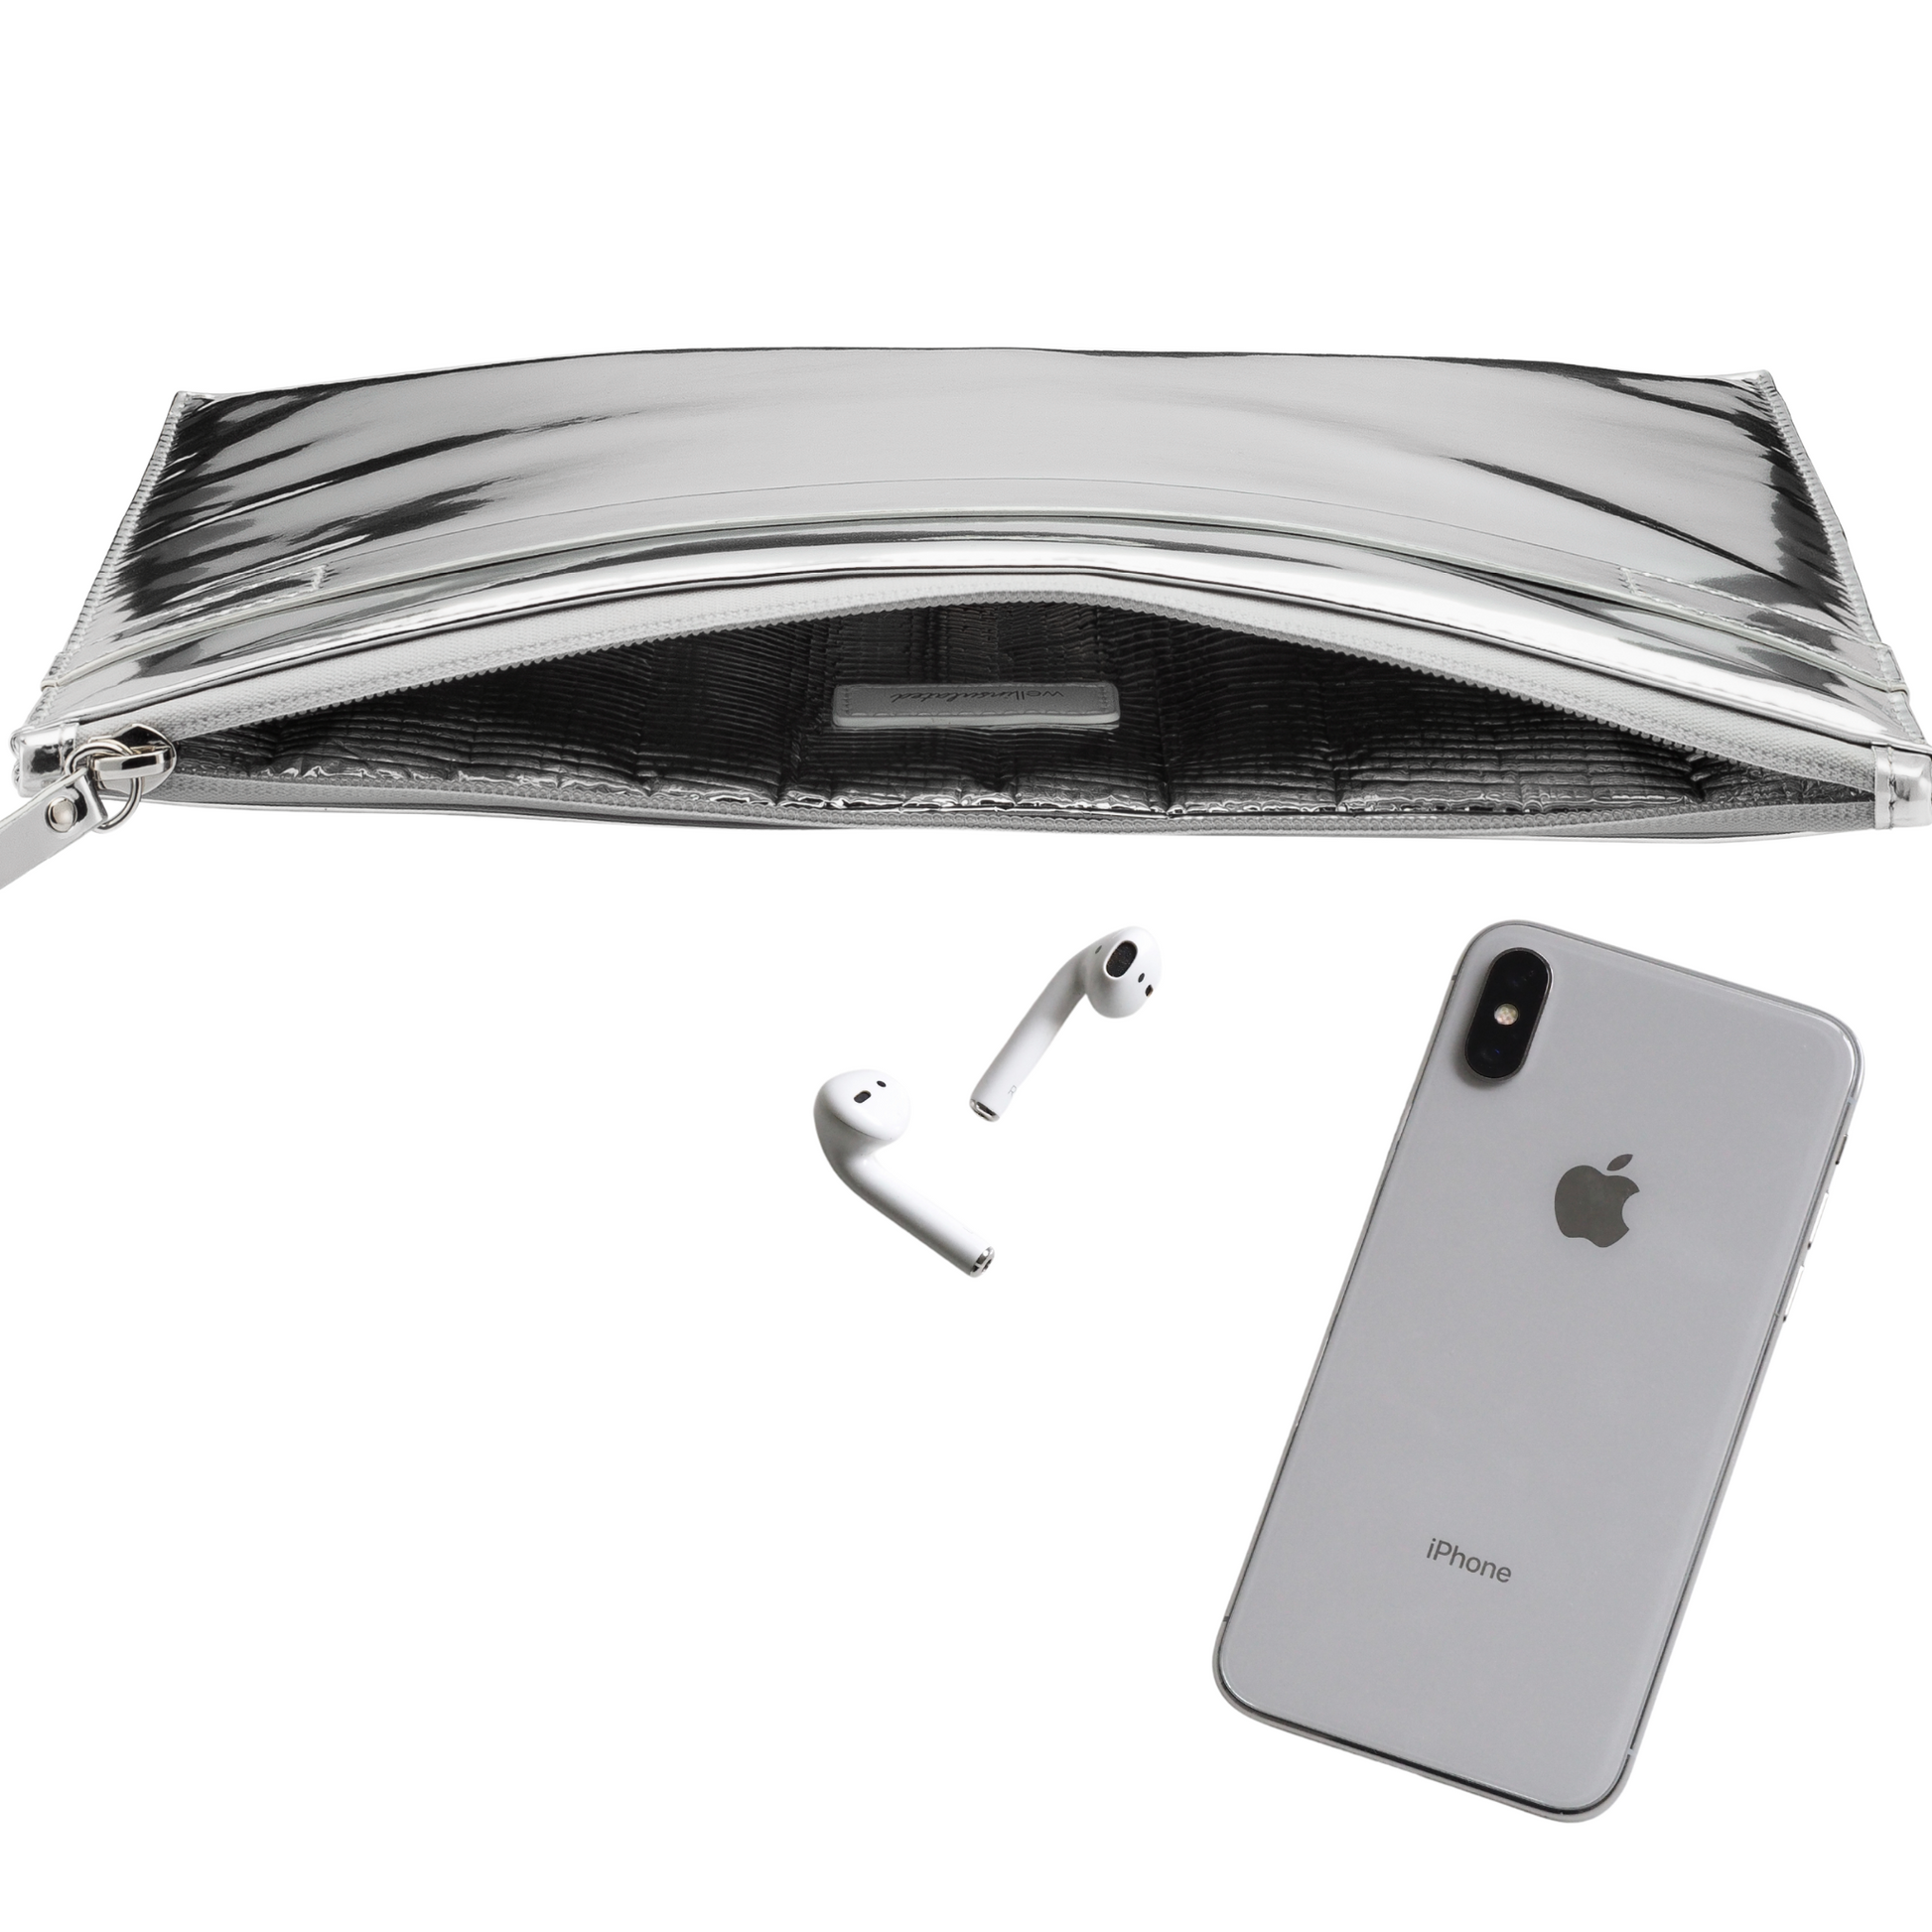 Side view of the inside of the Performance Tech Pouch. The silver pouch is open showing the silver interior of the bag. There is an iPhone and ear buds near the bag.